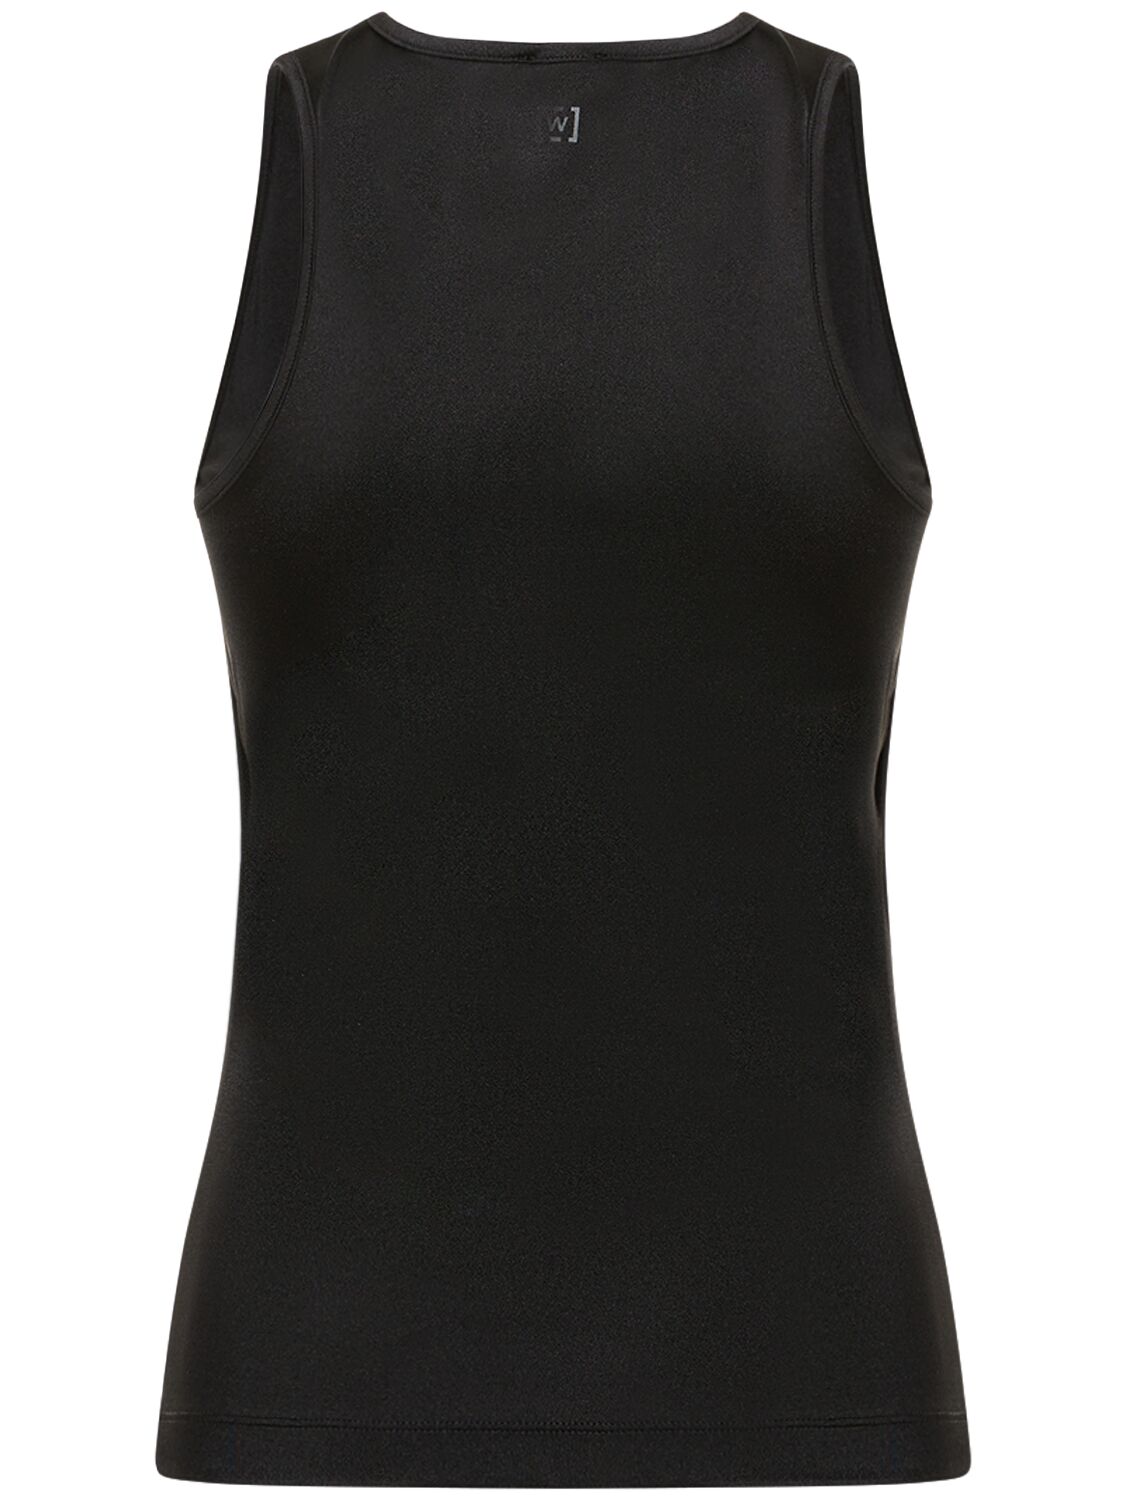 Wolford Aurora Pure Top Sleeveless Black for Women 